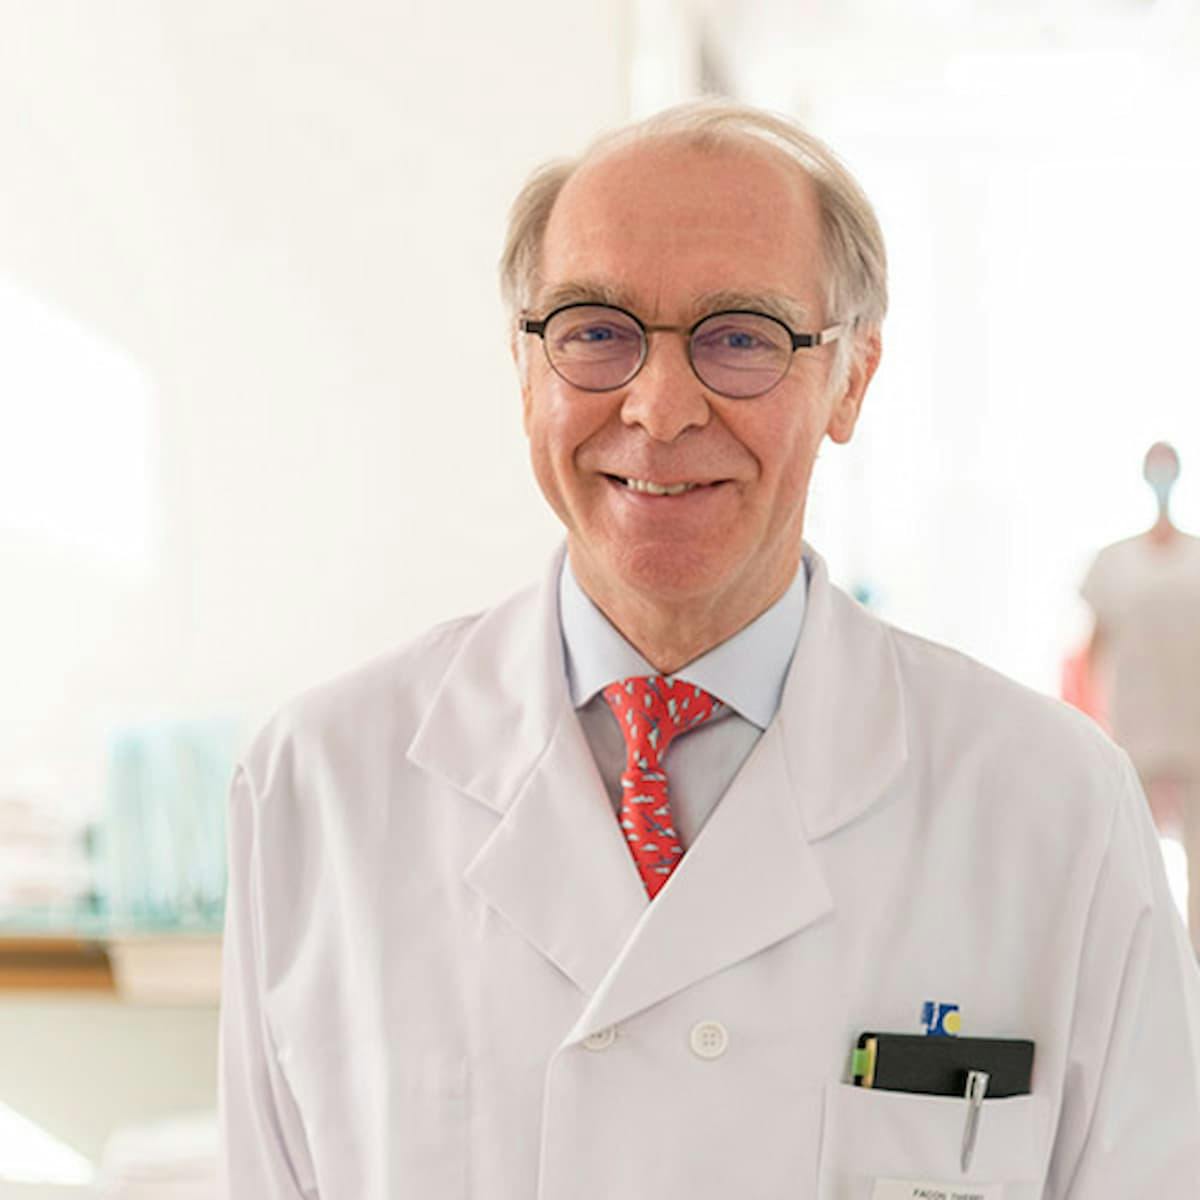 Thierry Facon, MD, Hematology Division head and assistant professor of hematology at Lille University Hospital in France